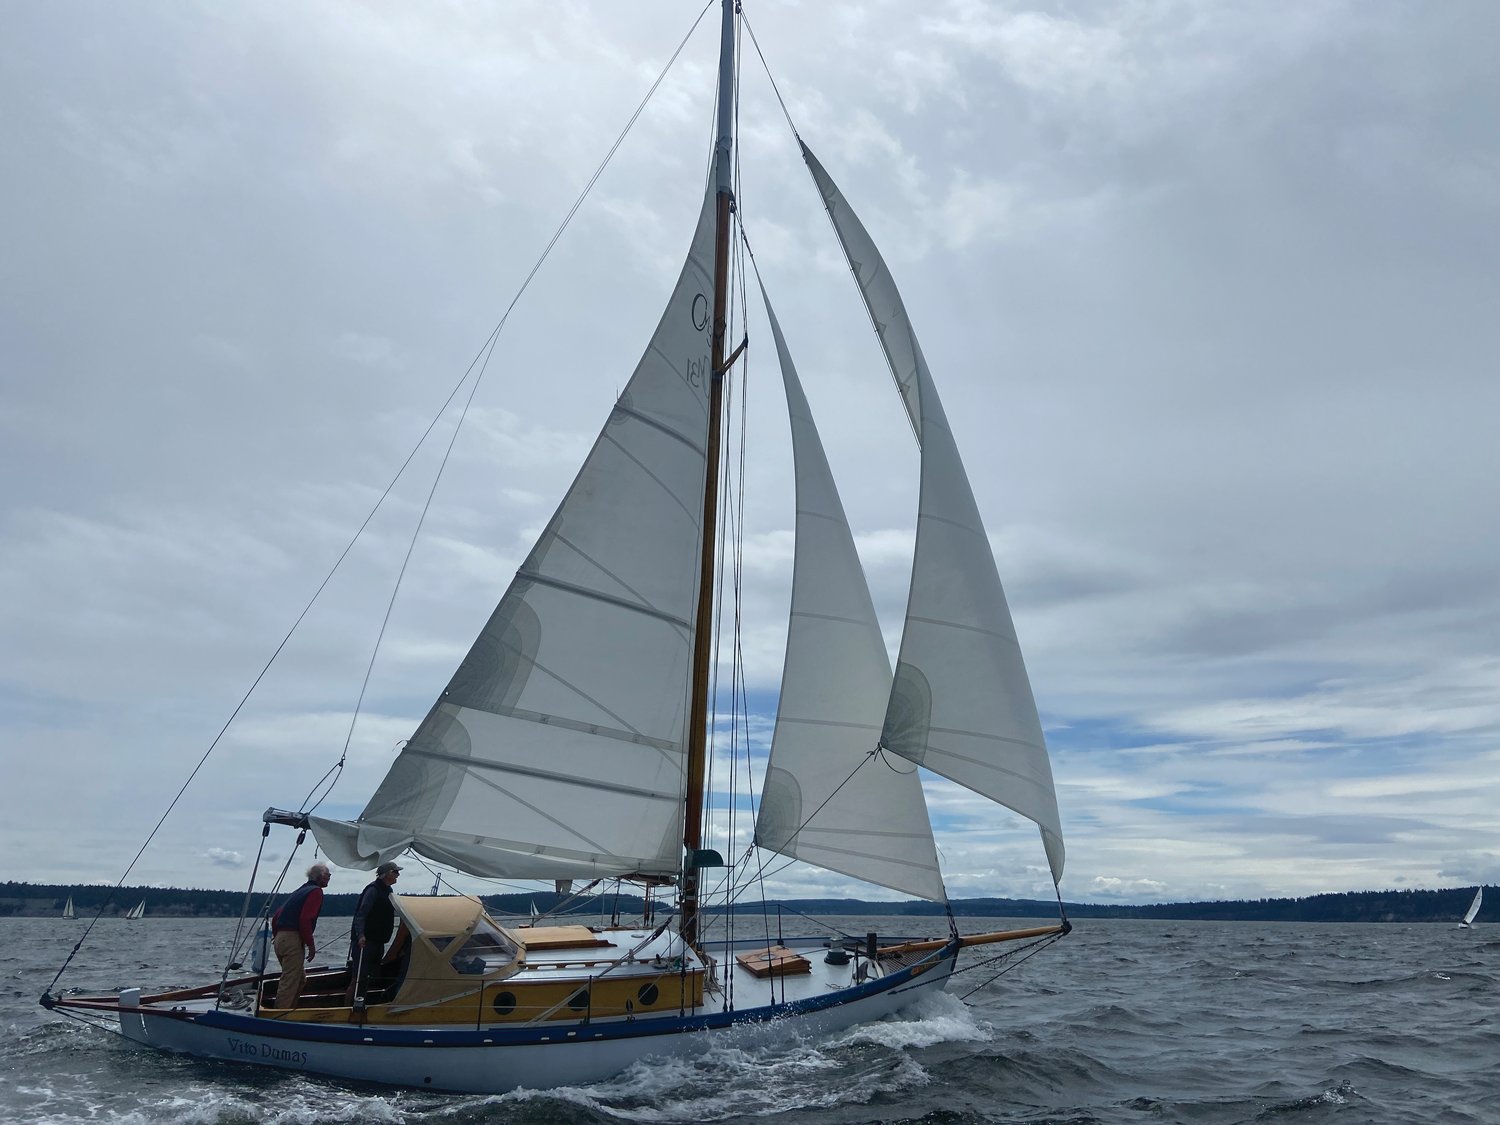 Navigating the waters of Port Townsend Bay, “Vito Dumas” competes in the weekend racing. The sailboat and crew finished second in Cruising Class.